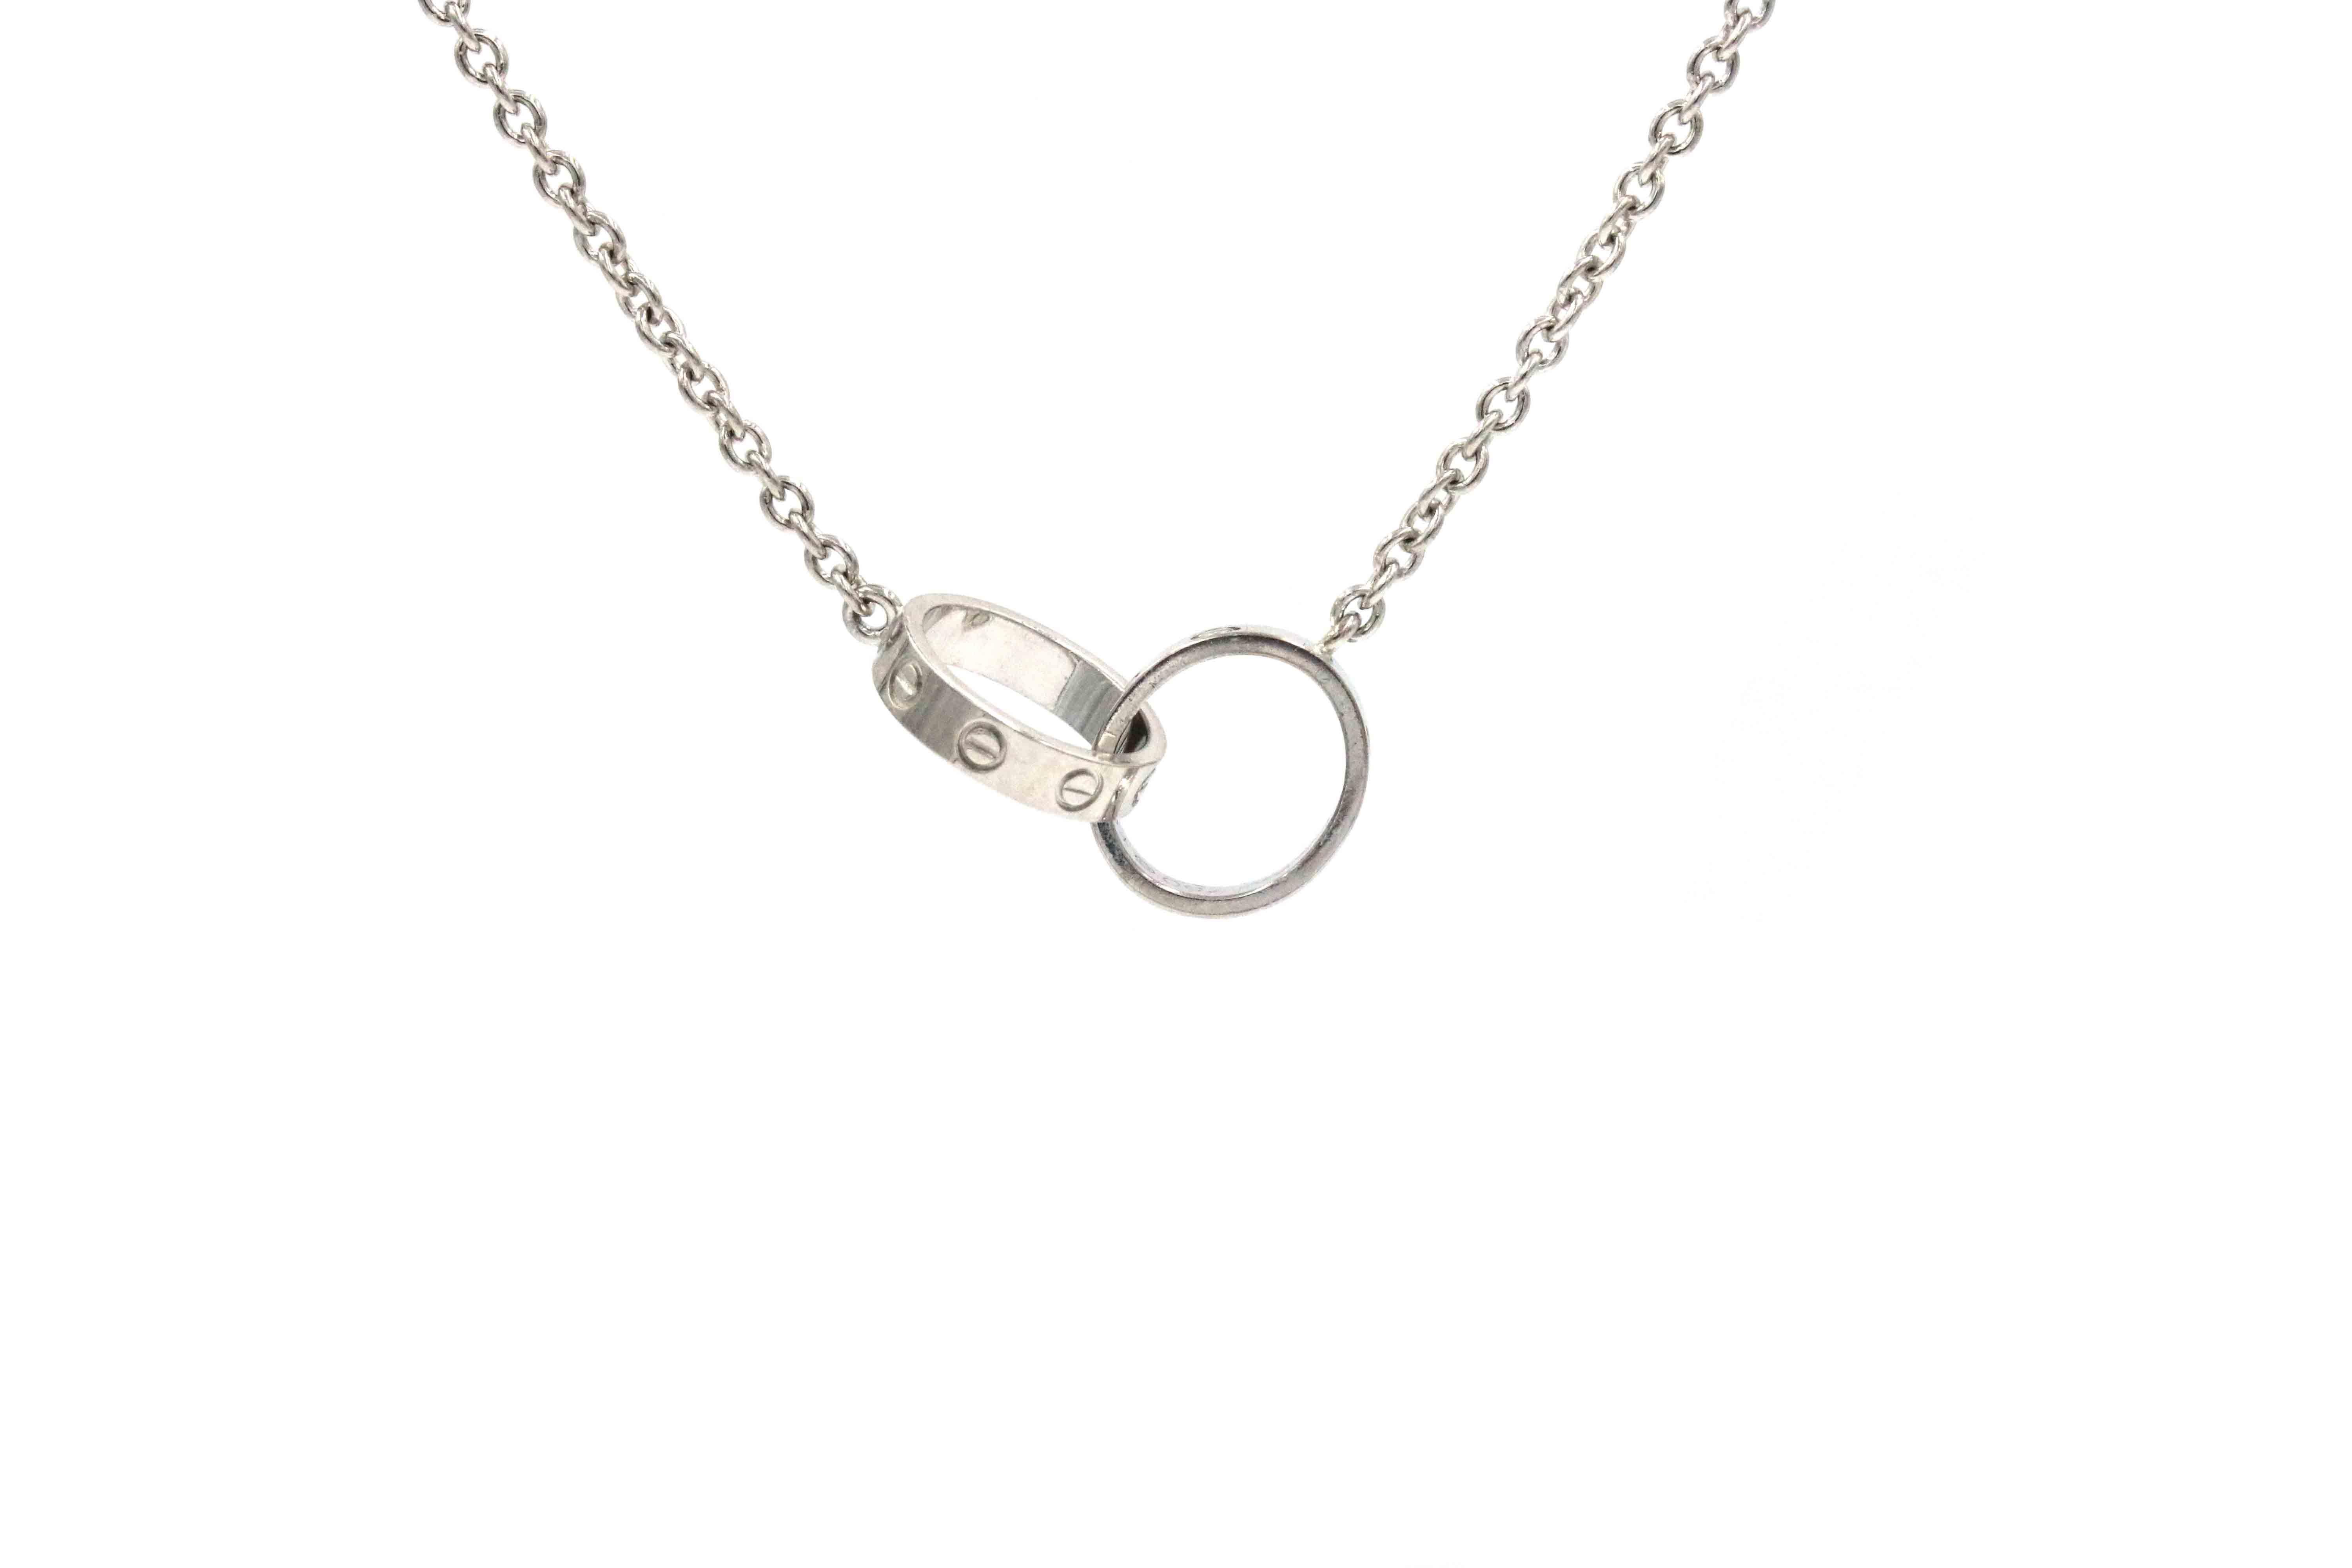 Cartier Baby Love Necklace in 18K White Gold In Excellent Condition For Sale In Naples, FL